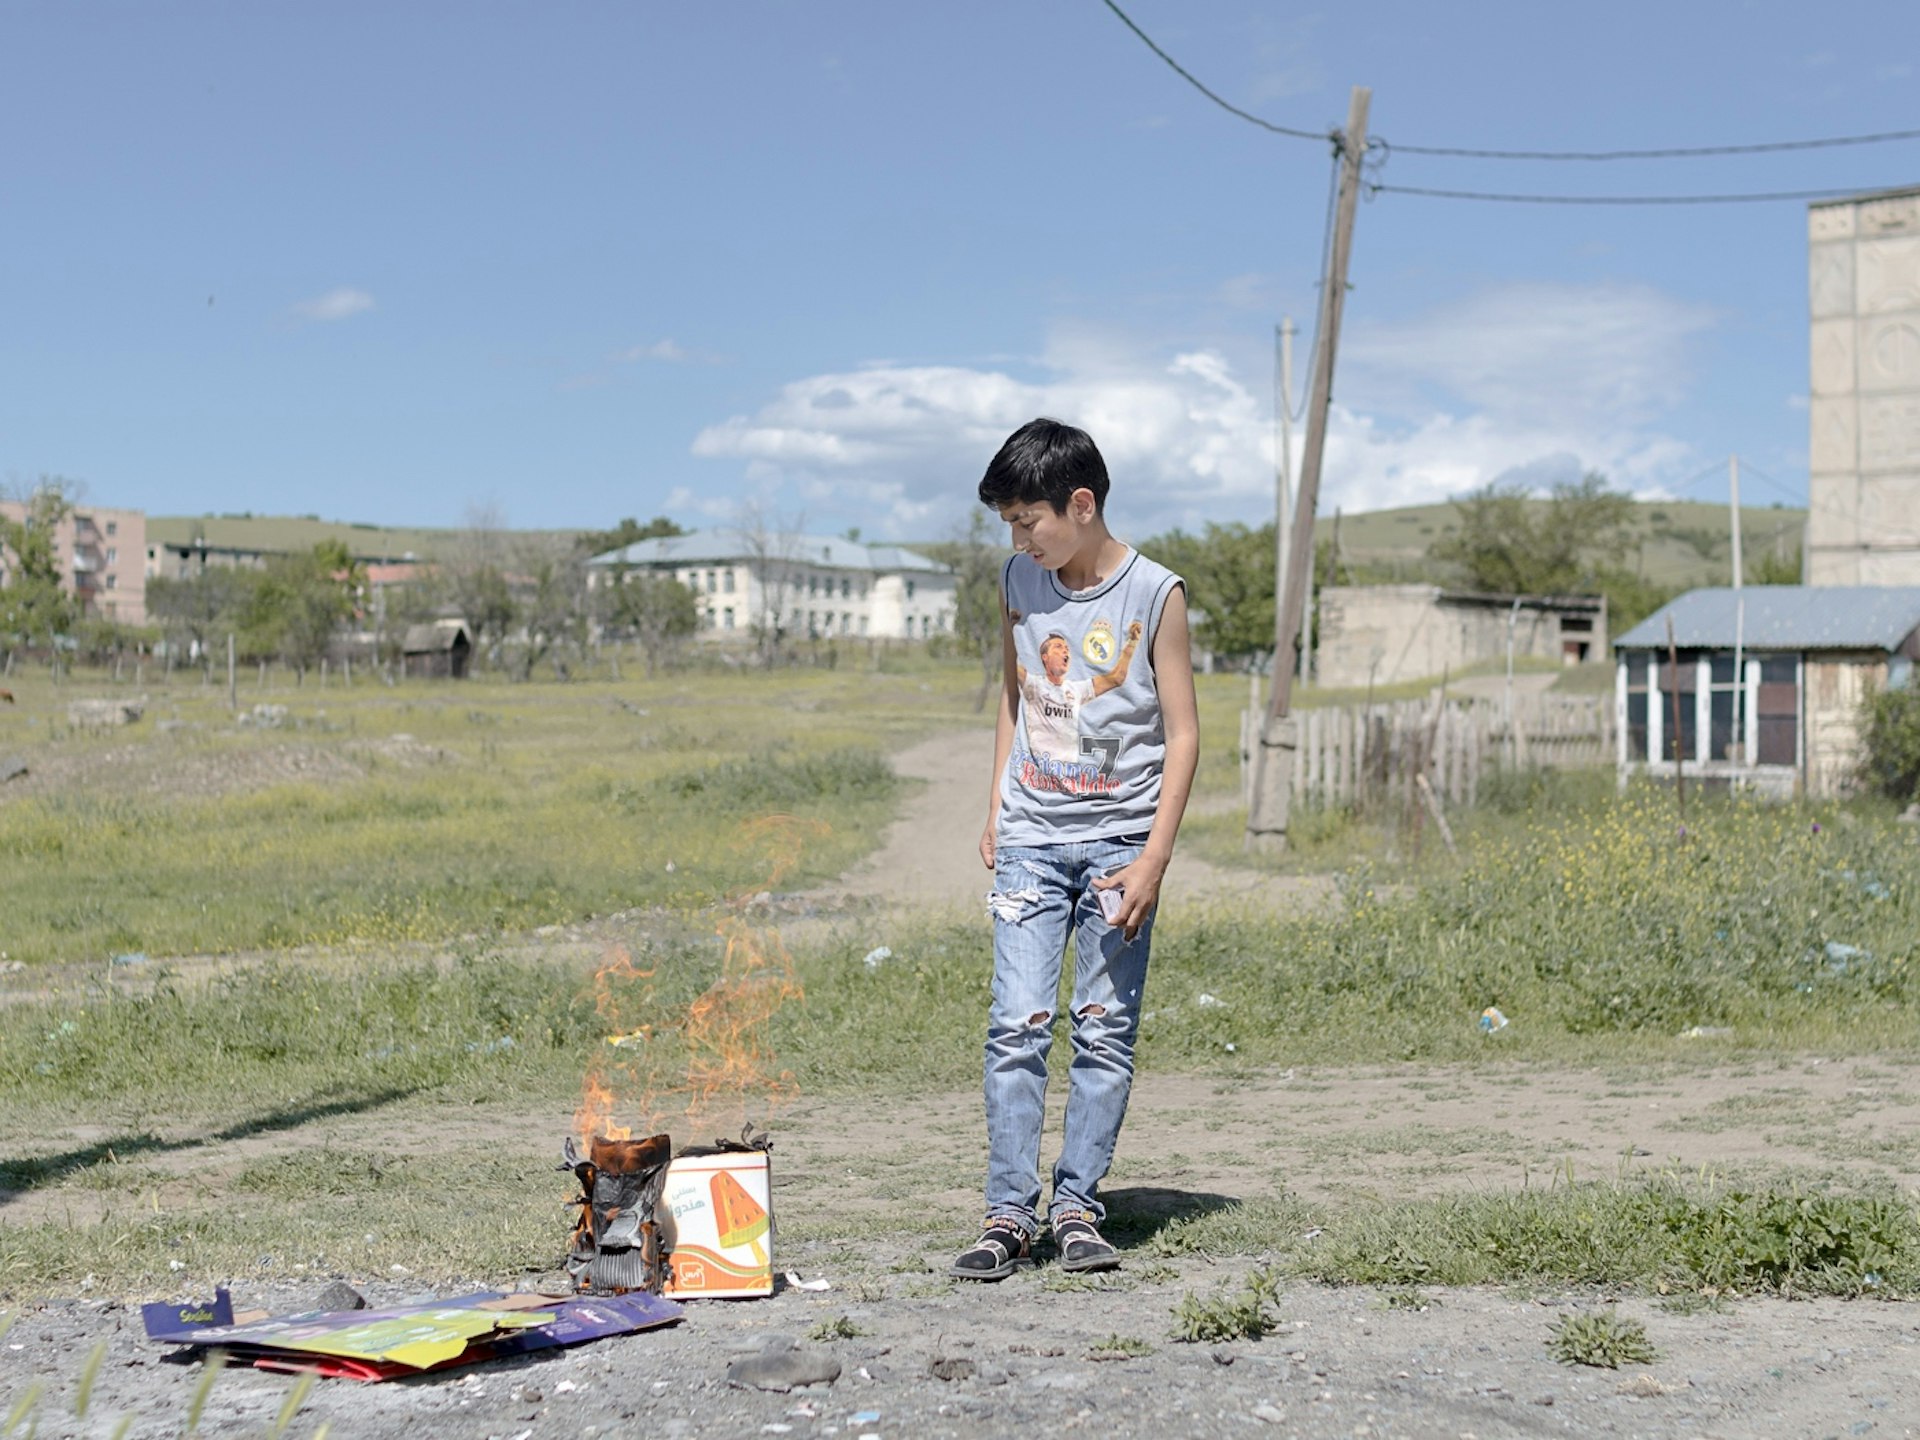 A boy burns collected garbage in the center of the settlement. Children struggle to find activities in Vaziani. The parents in the settlement worry about the future of their kids, thus they try to give them better prospects in life through education.